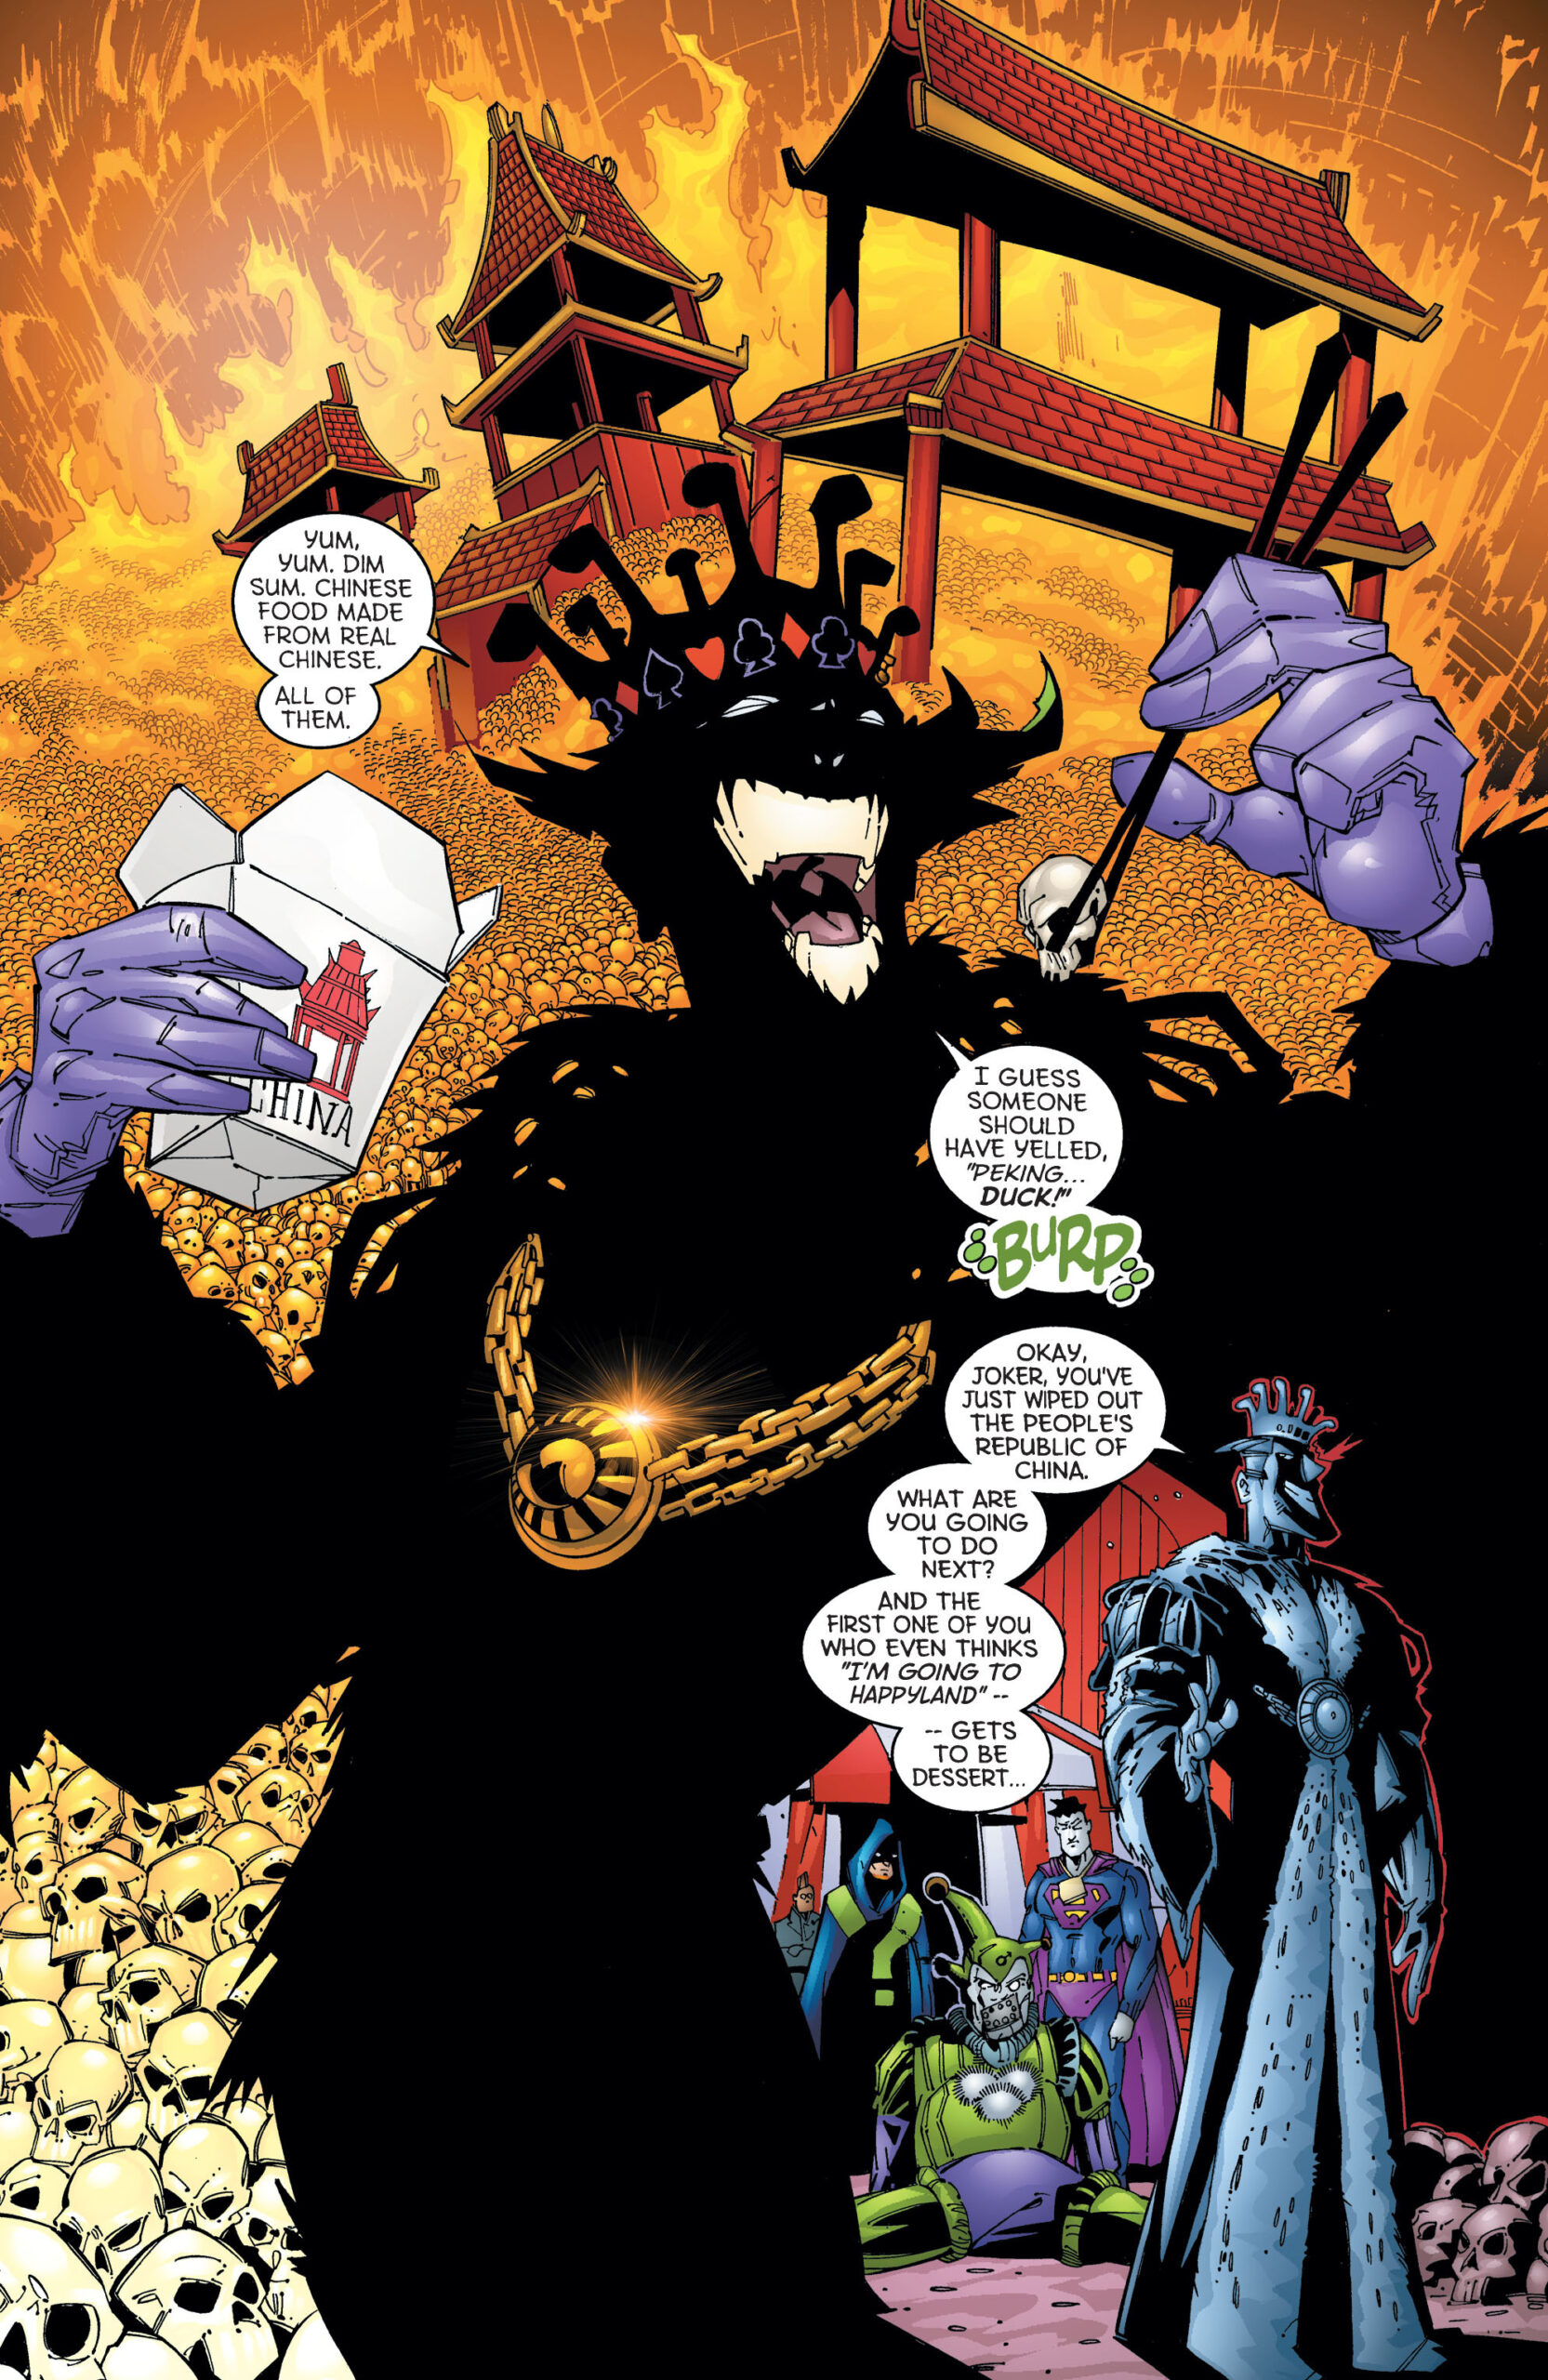 The Joker eats the entire population of China in Emperor Joker Vol. 1 #1 "The Reign of Emperor Joker (Part I of V) - It's a Joker World, Baby, We Just Live In It!" (2000), DC Comics. Words by Joe Kelly and Jeph Loeb, art by Duncan Rouleau, Todd Nauck, Carlo Barberi, Scott McDaniel, Marlo Alquiza, Jaime Mendoza, Richard Bonk, Tanya Horie, Richard Horie, and Richard Starkings.